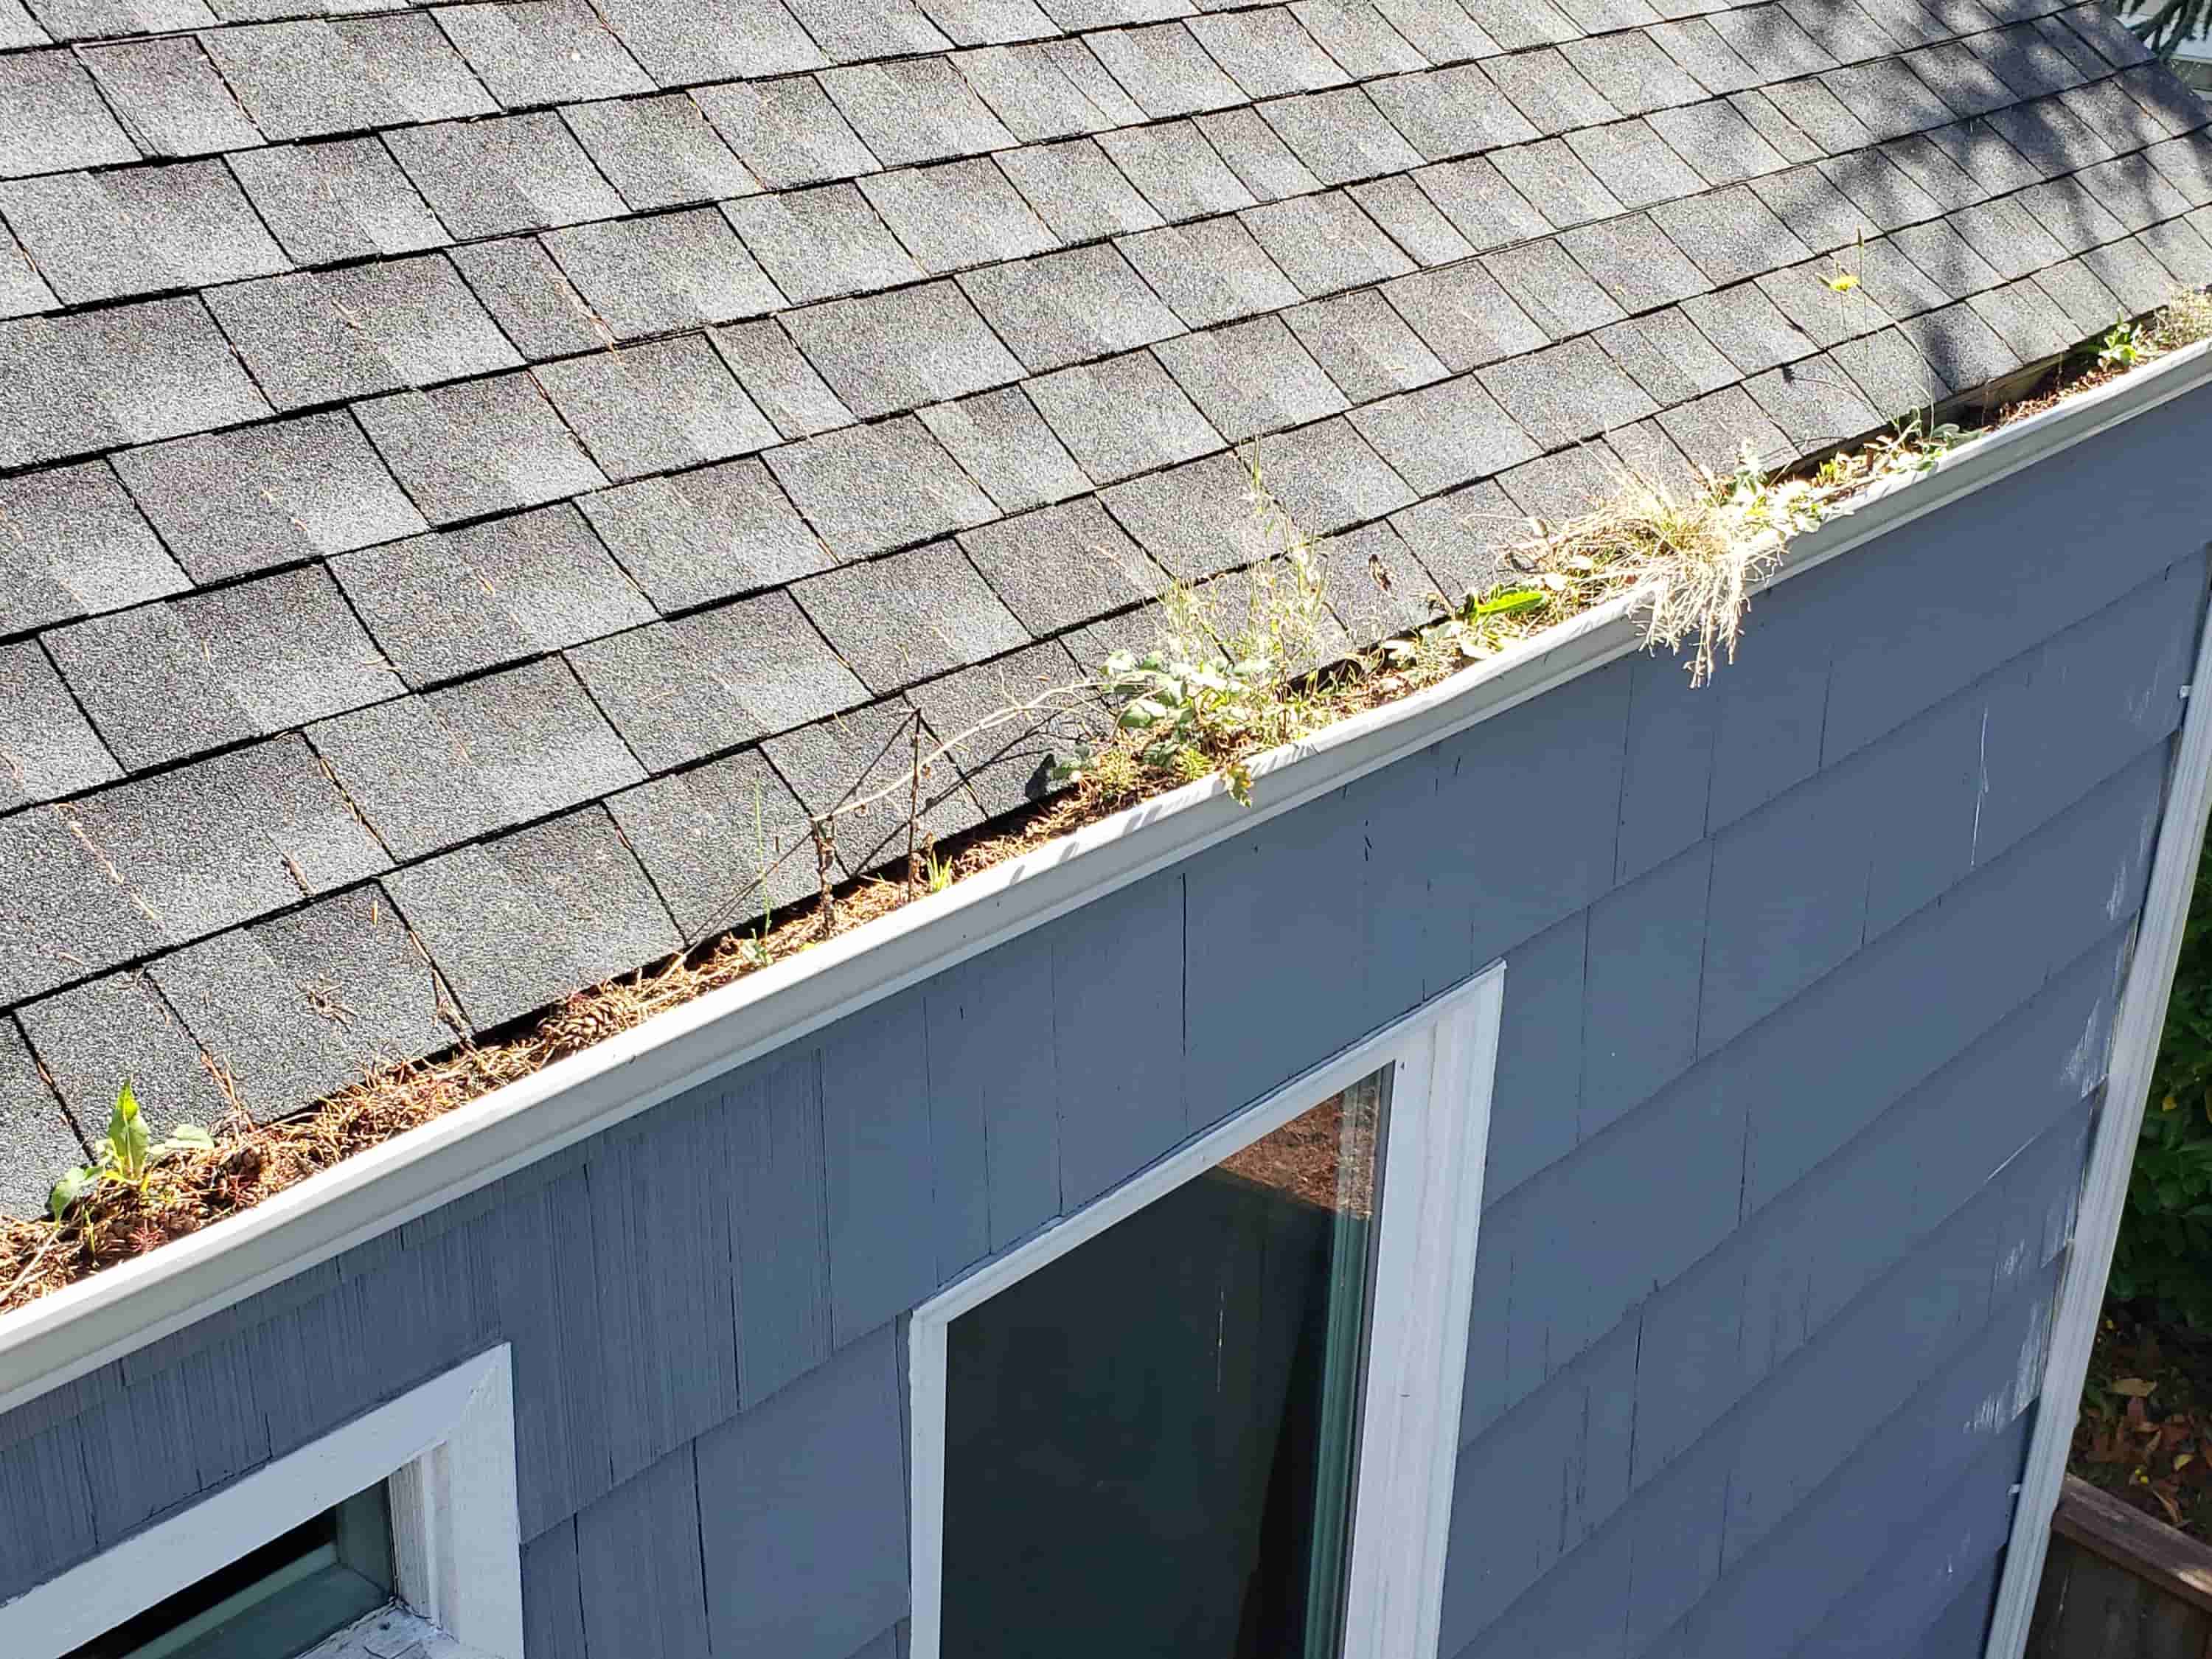 blow leaves off roof